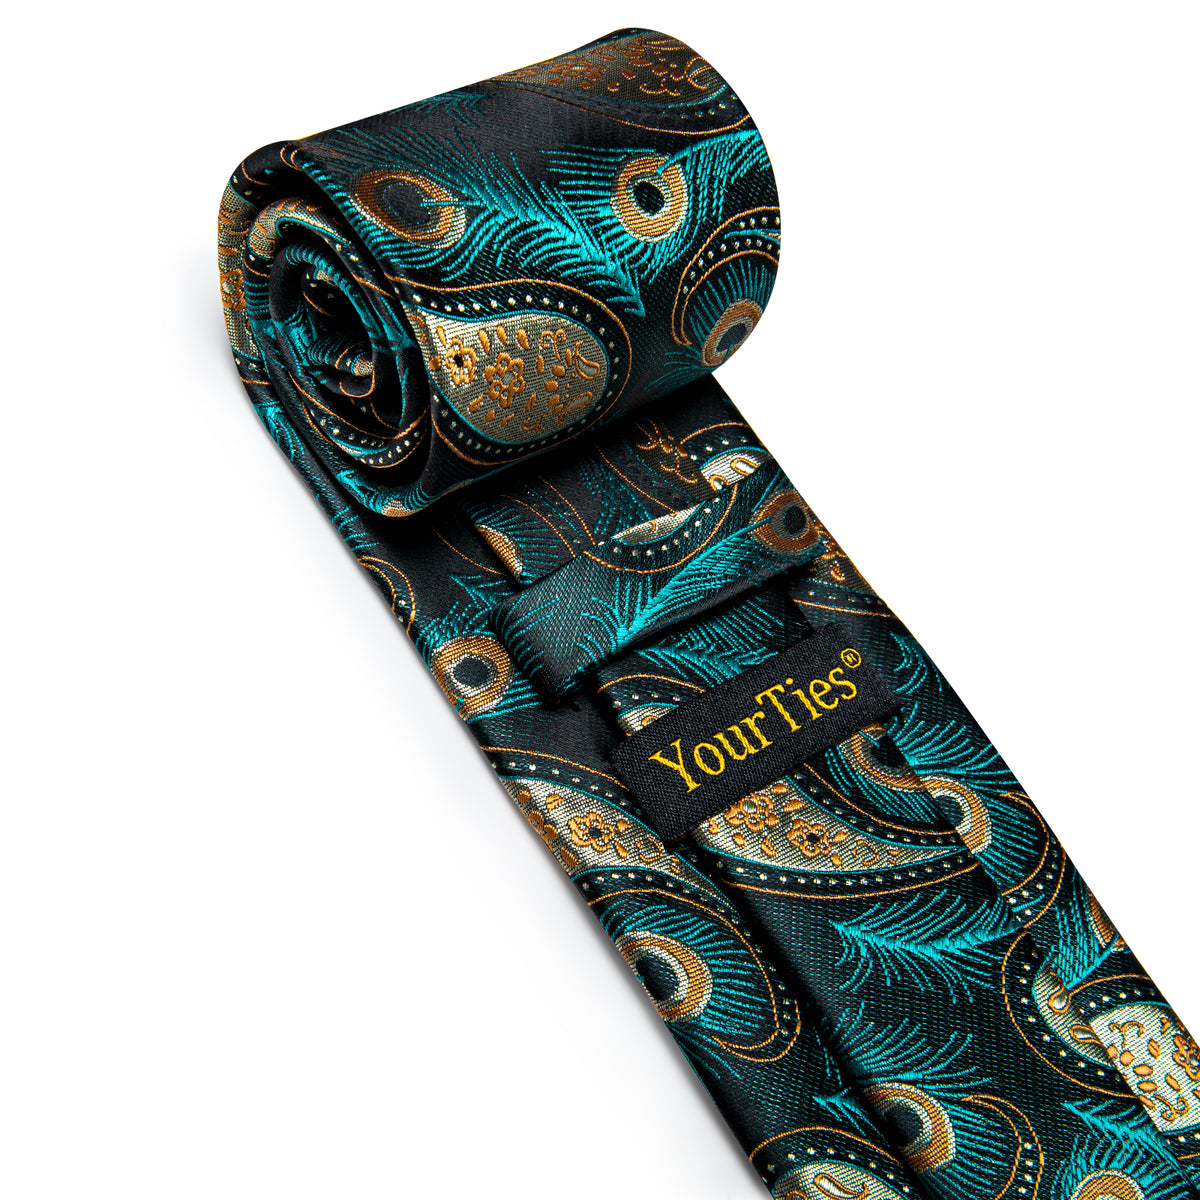 YourTies Blue Green Yellow Paisley Feather Men's Necktie Pocket Square Cufflinks Set